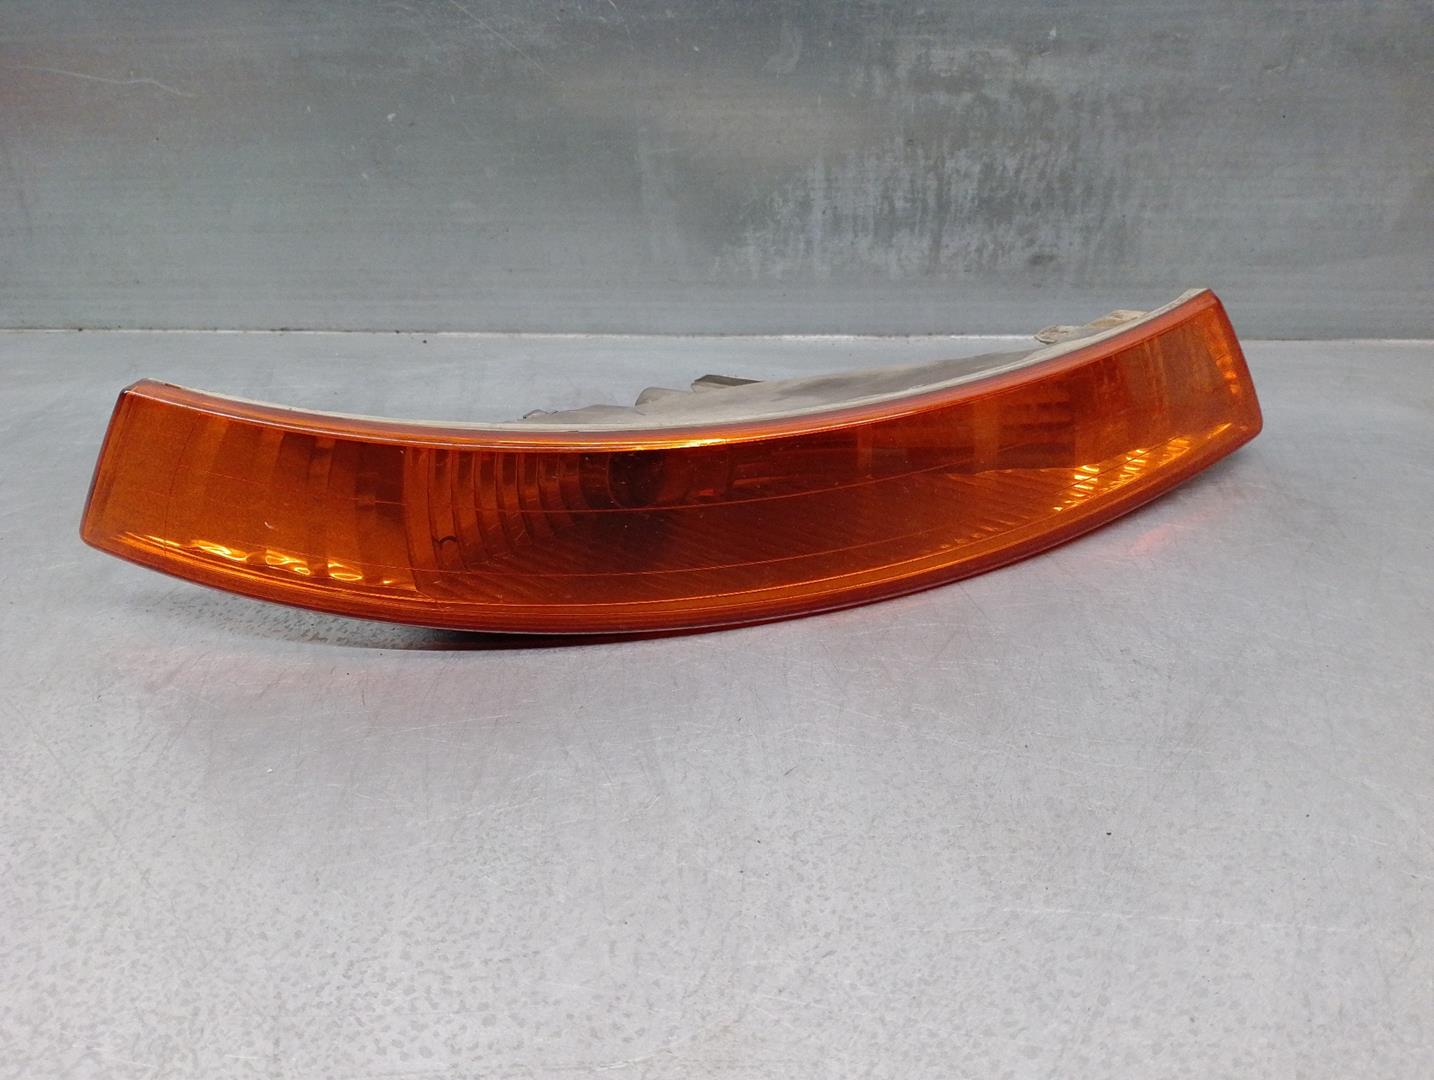 RENAULT Front Right Fender Turn Signal 8200007030, 5PUERTAS 24197049